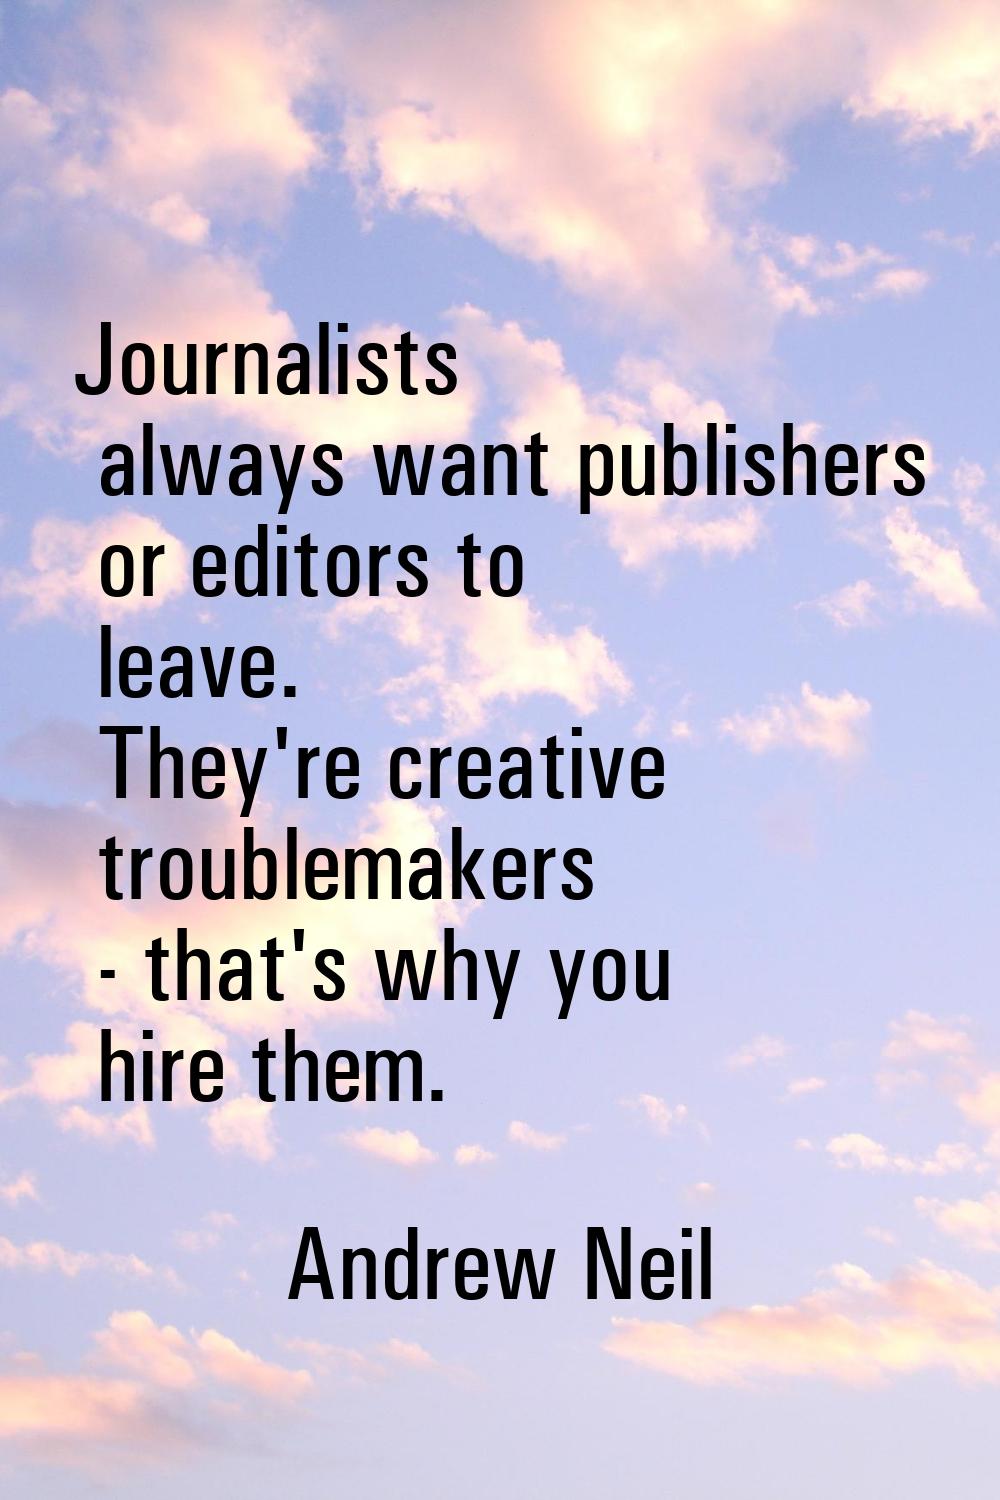 Journalists always want publishers or editors to leave. They're creative troublemakers - that's why